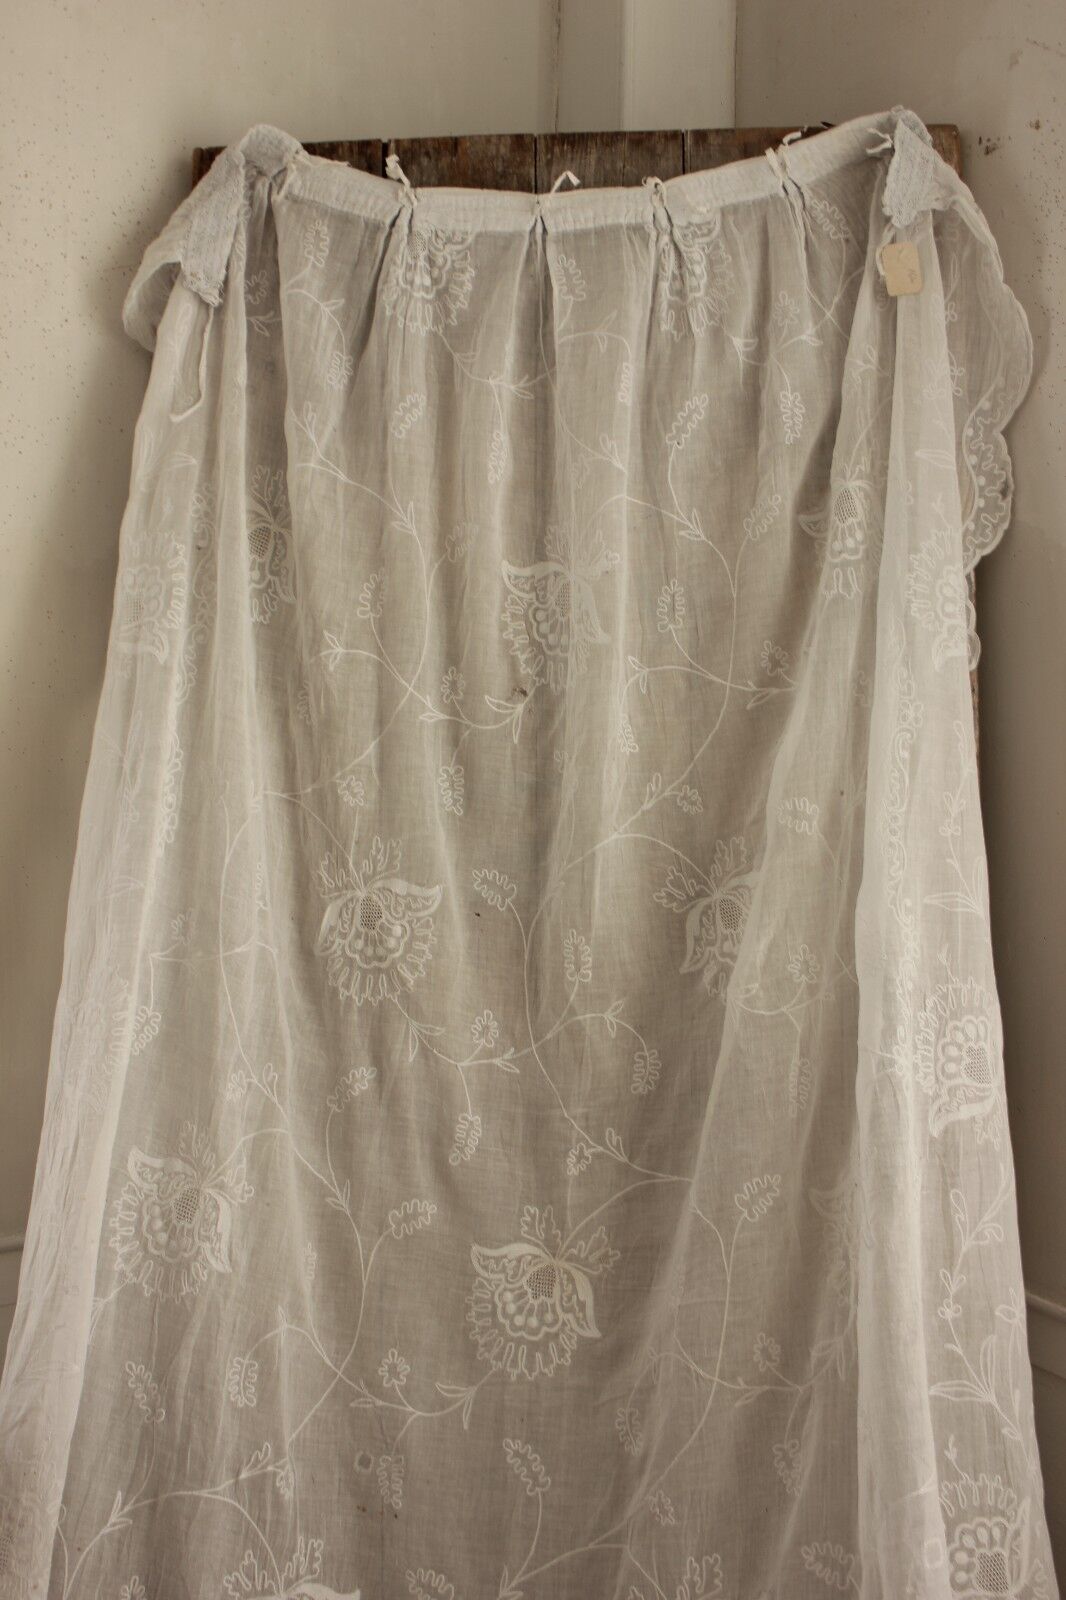 Curtain White tambour lace embroidered tulle net curtain gorgeous shabby chic